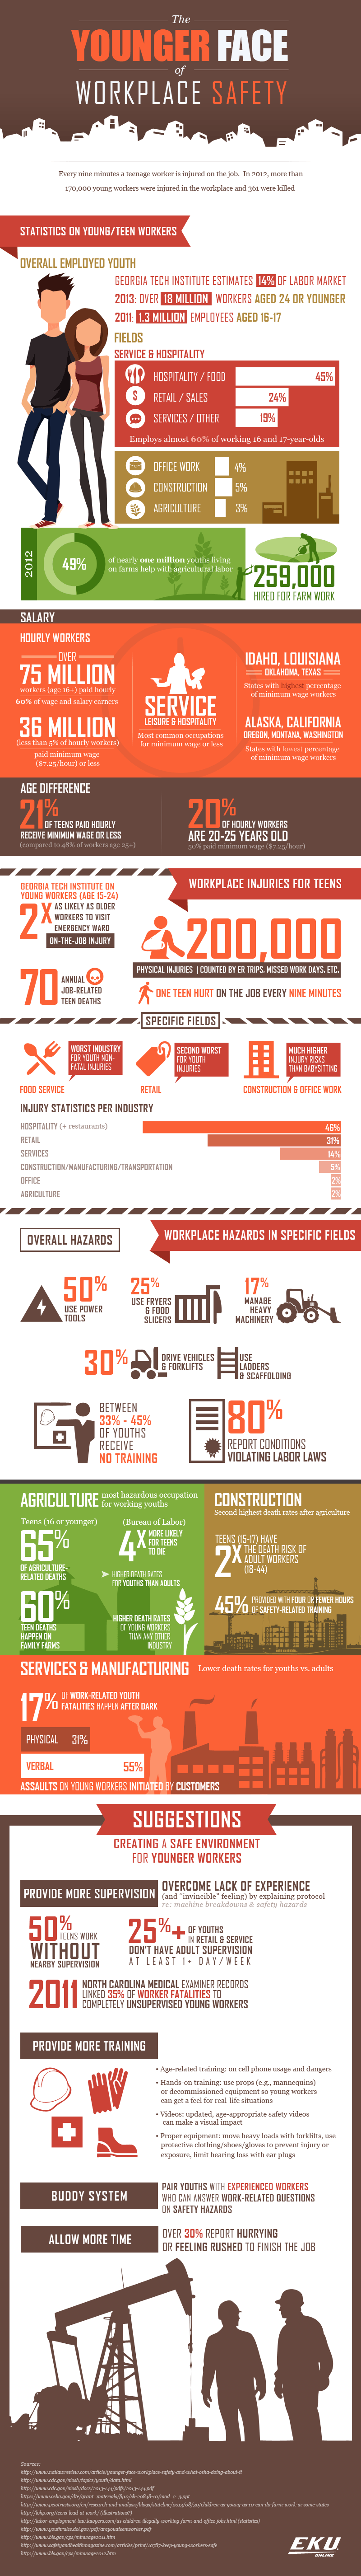 workplace safety infographic